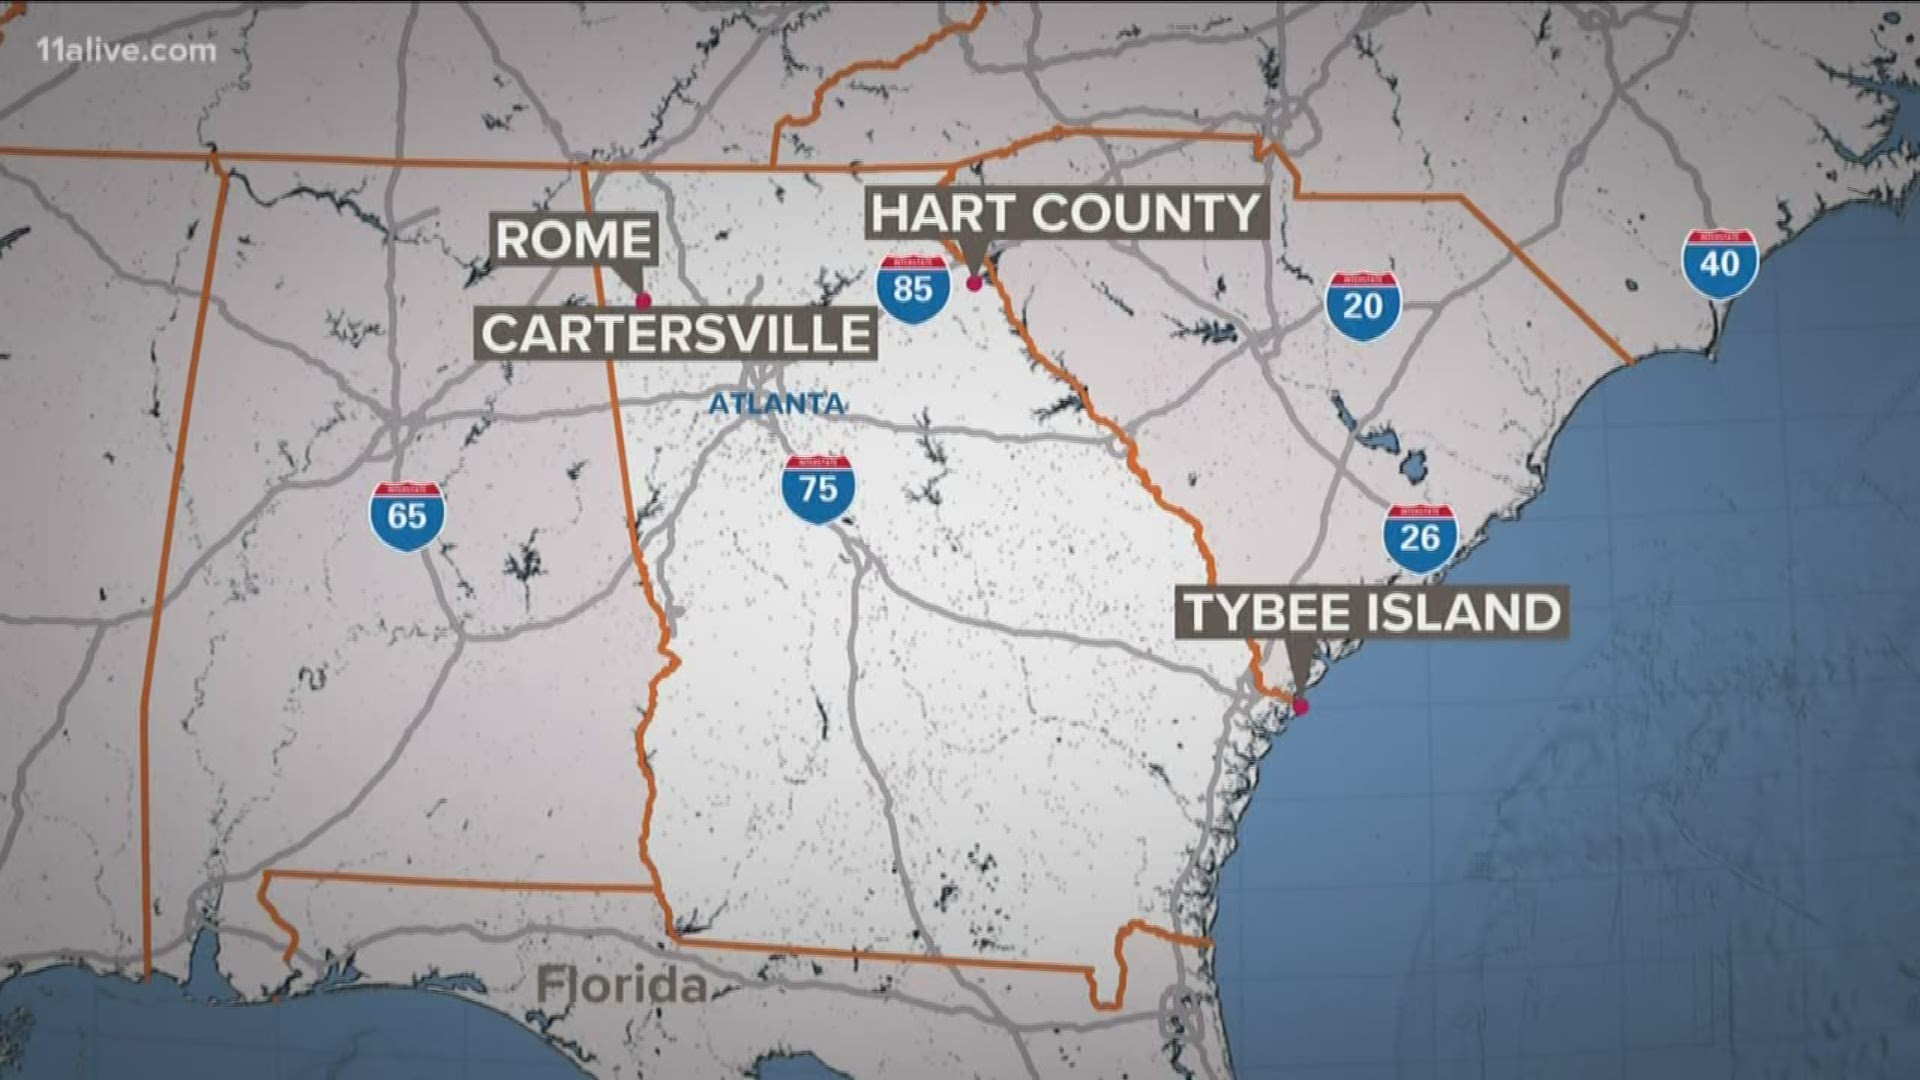 The Atlanta Business Reports Rome, Cartersville, Tybee Island, and Hart County are suing the company.